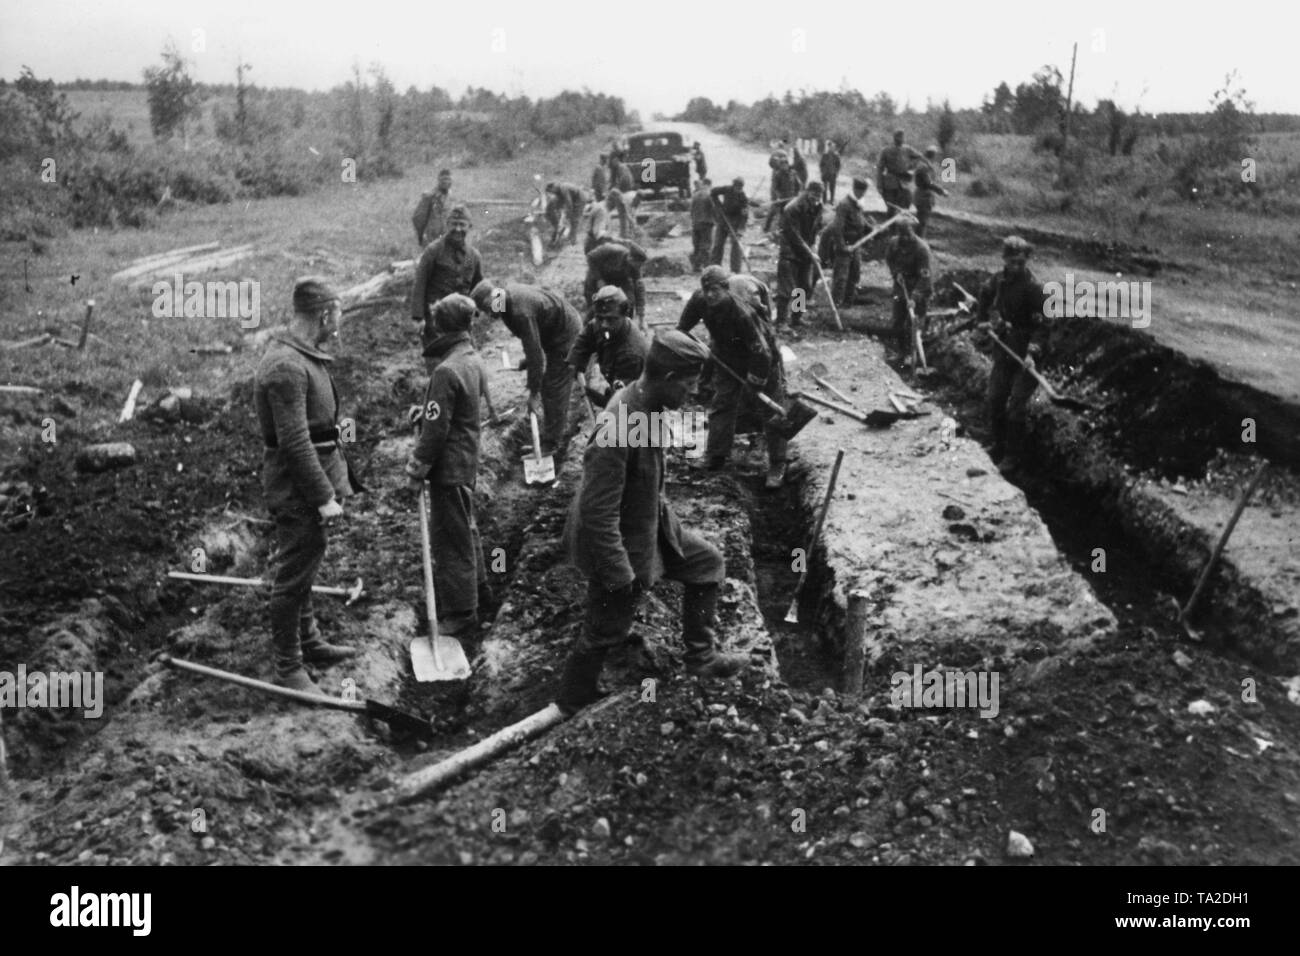 Workers of the Todt Organization are buliding passable roads for reinforcements to the Eastern Front in the Soviet Union. War reporter: Schneider. Stock Photo